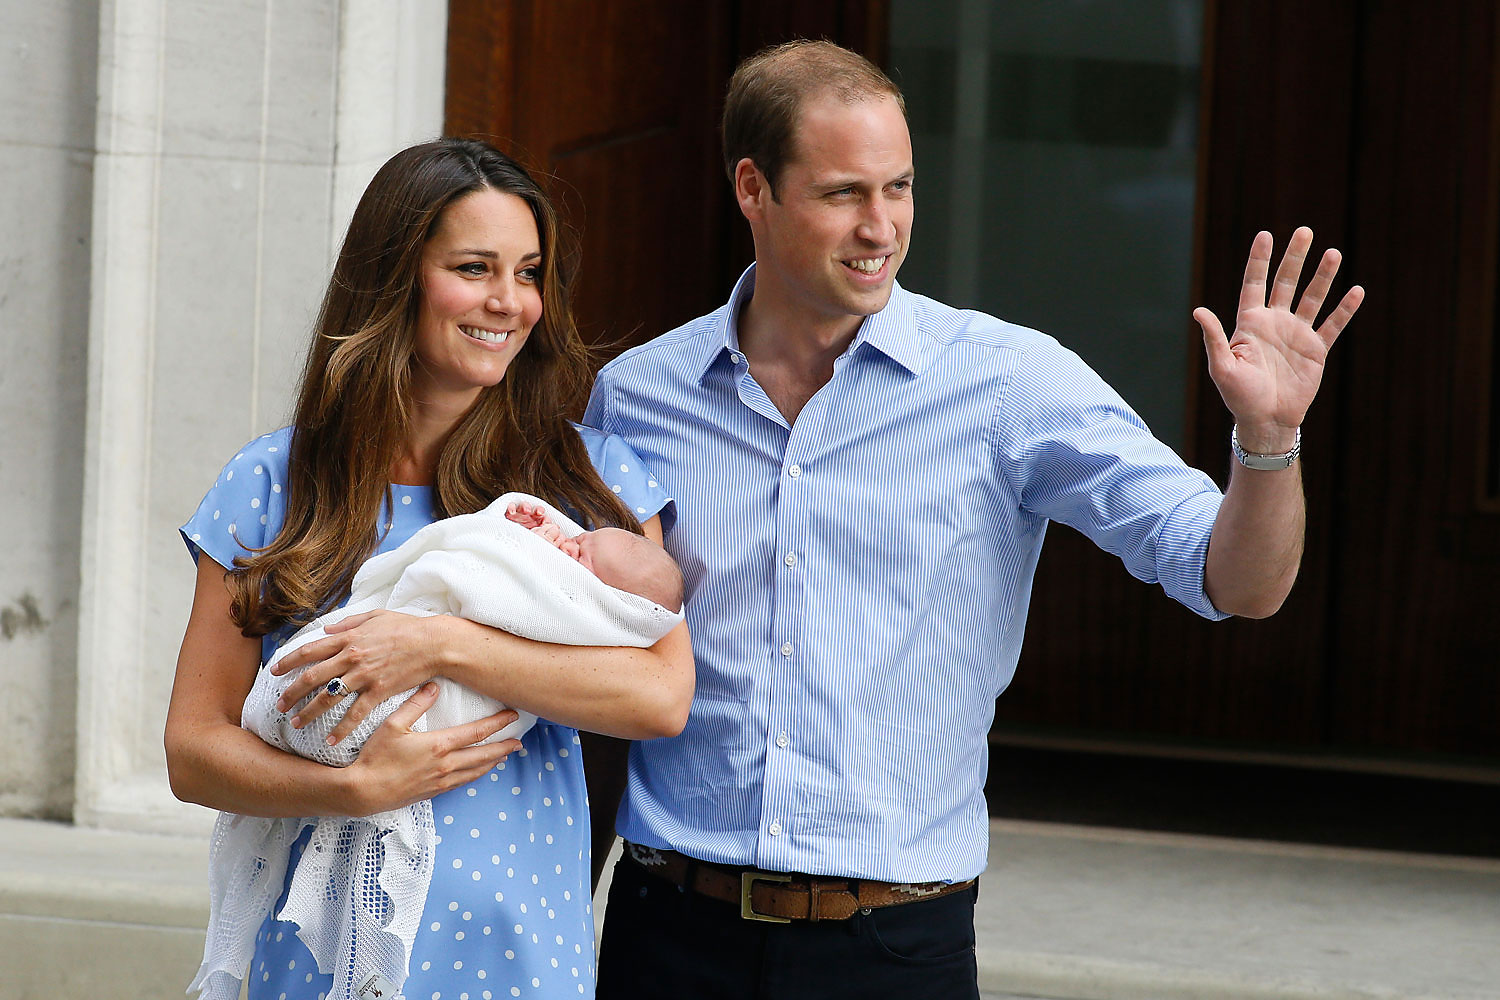 Prince William, right, and Kate, Duchess of Cambridge, hold the Prince of Cambridge, as they pose for photographers outside St. Mary's Hospital in London, July 23, 2013. (Kirsty Wigglesworth&mdash;AP)